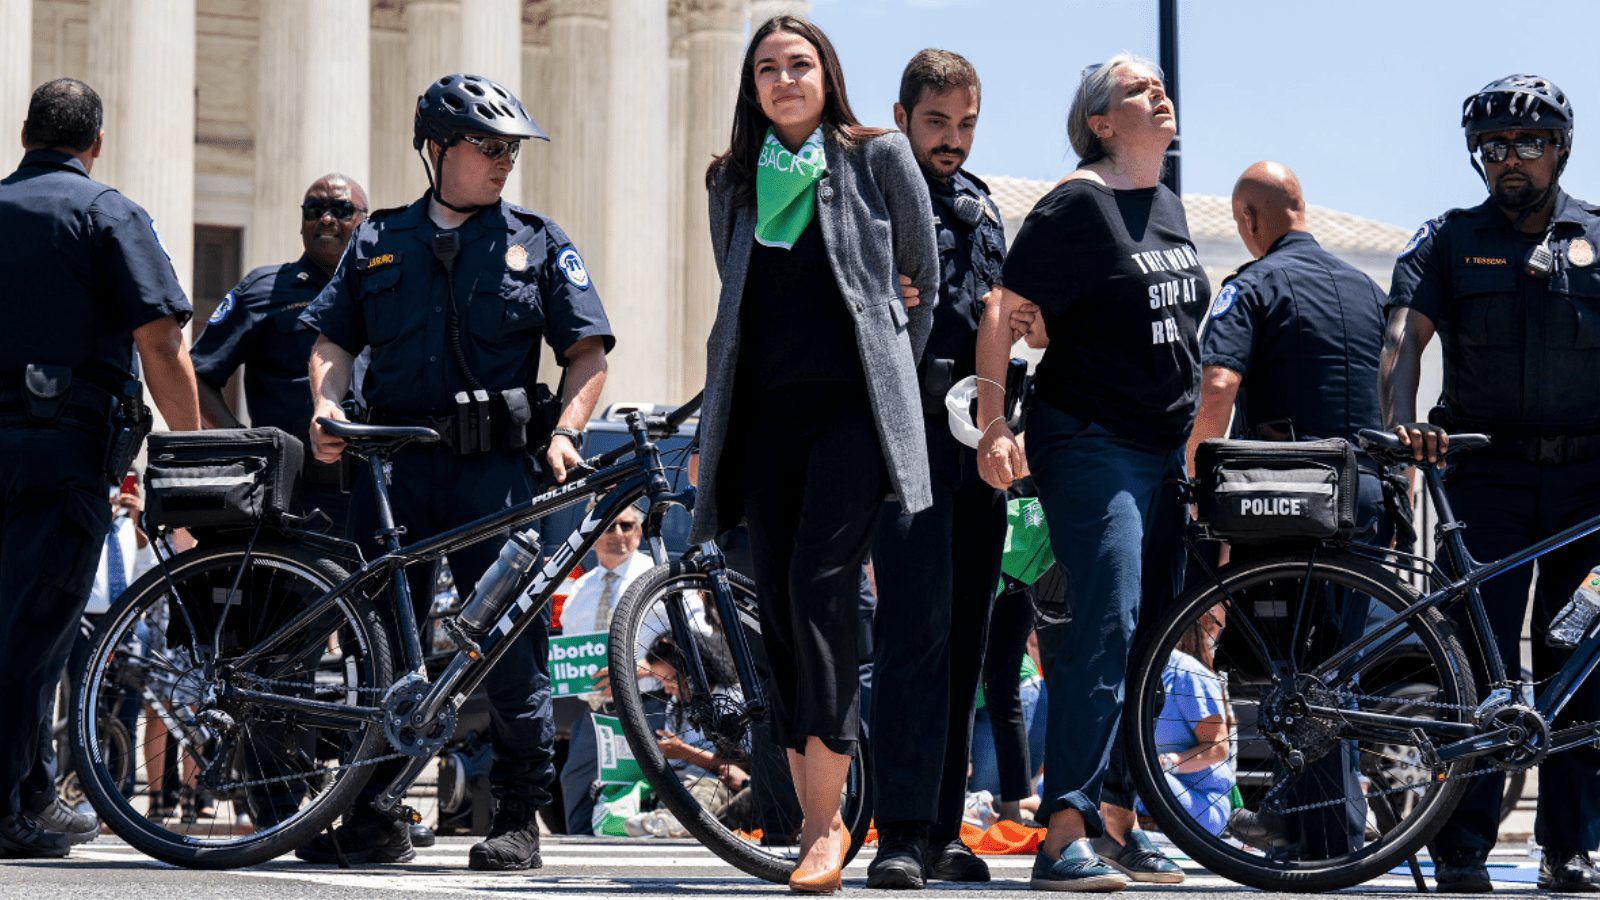 Members Congress 'Arrested' During Pro-Abortion Protest Outside Supreme Court